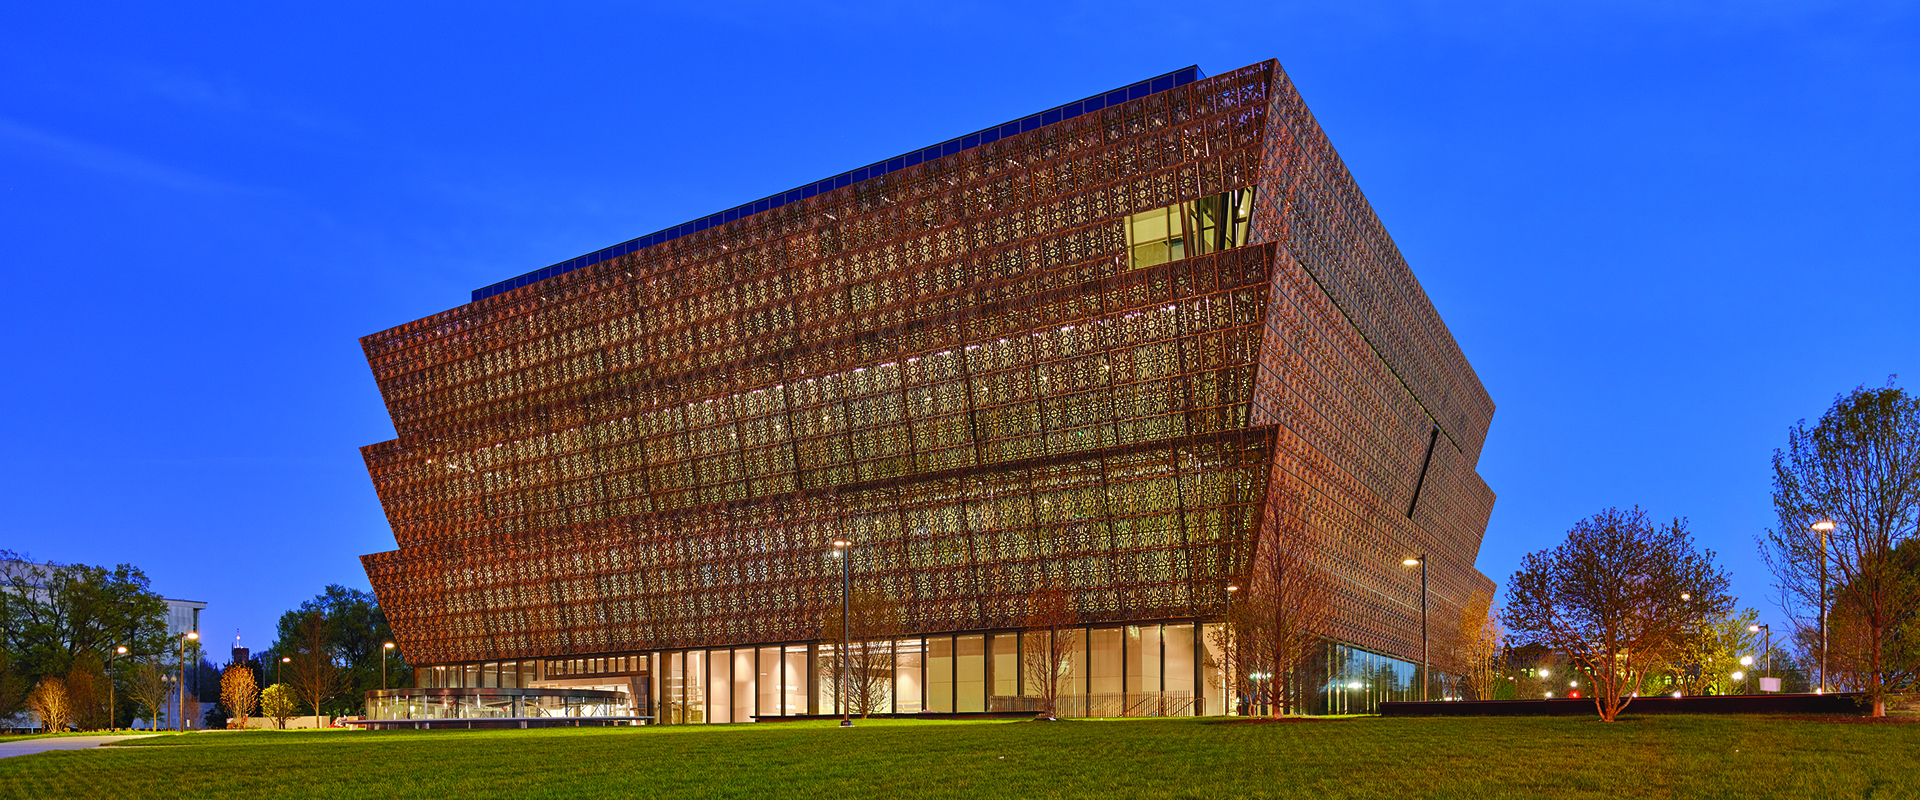 Smithsonian National Museum of African American History and Culture in Washington, D.C.